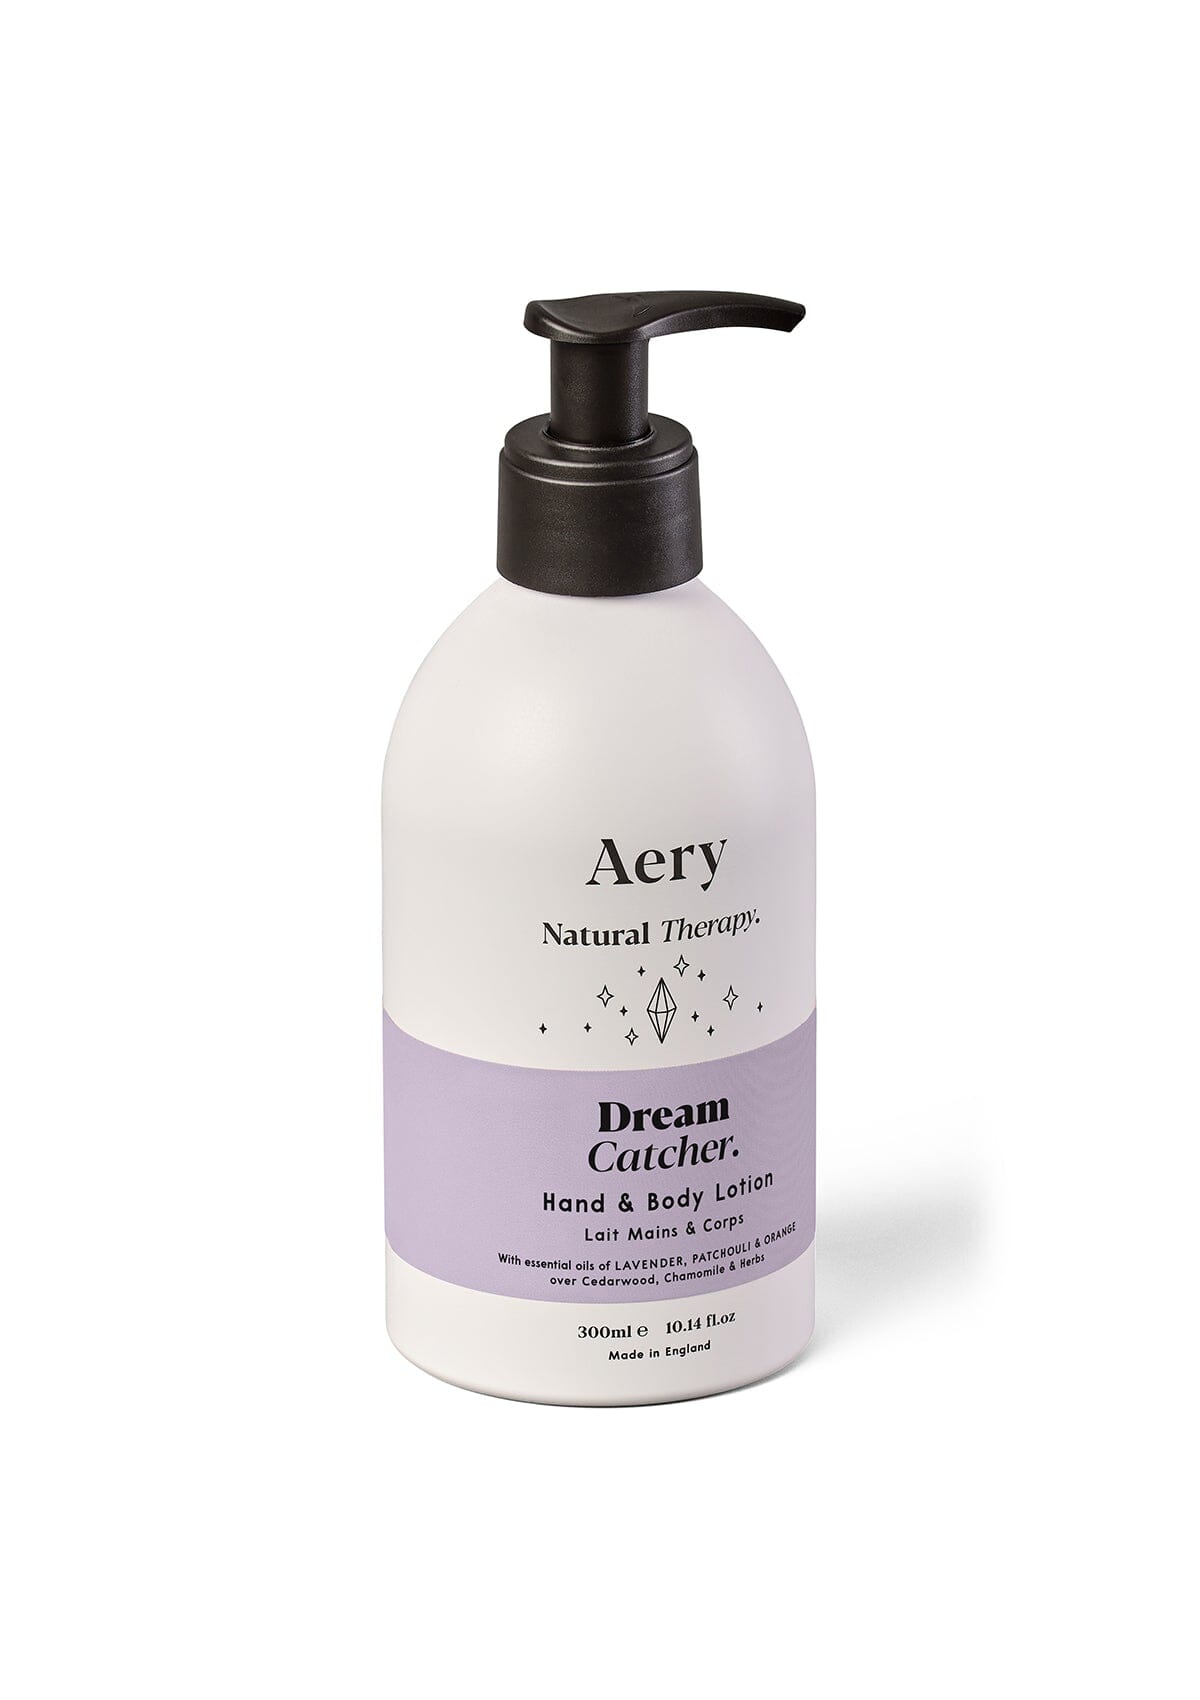 Lilac Dream Catcher Hand and Body Lotion by Aery displayed on white background 